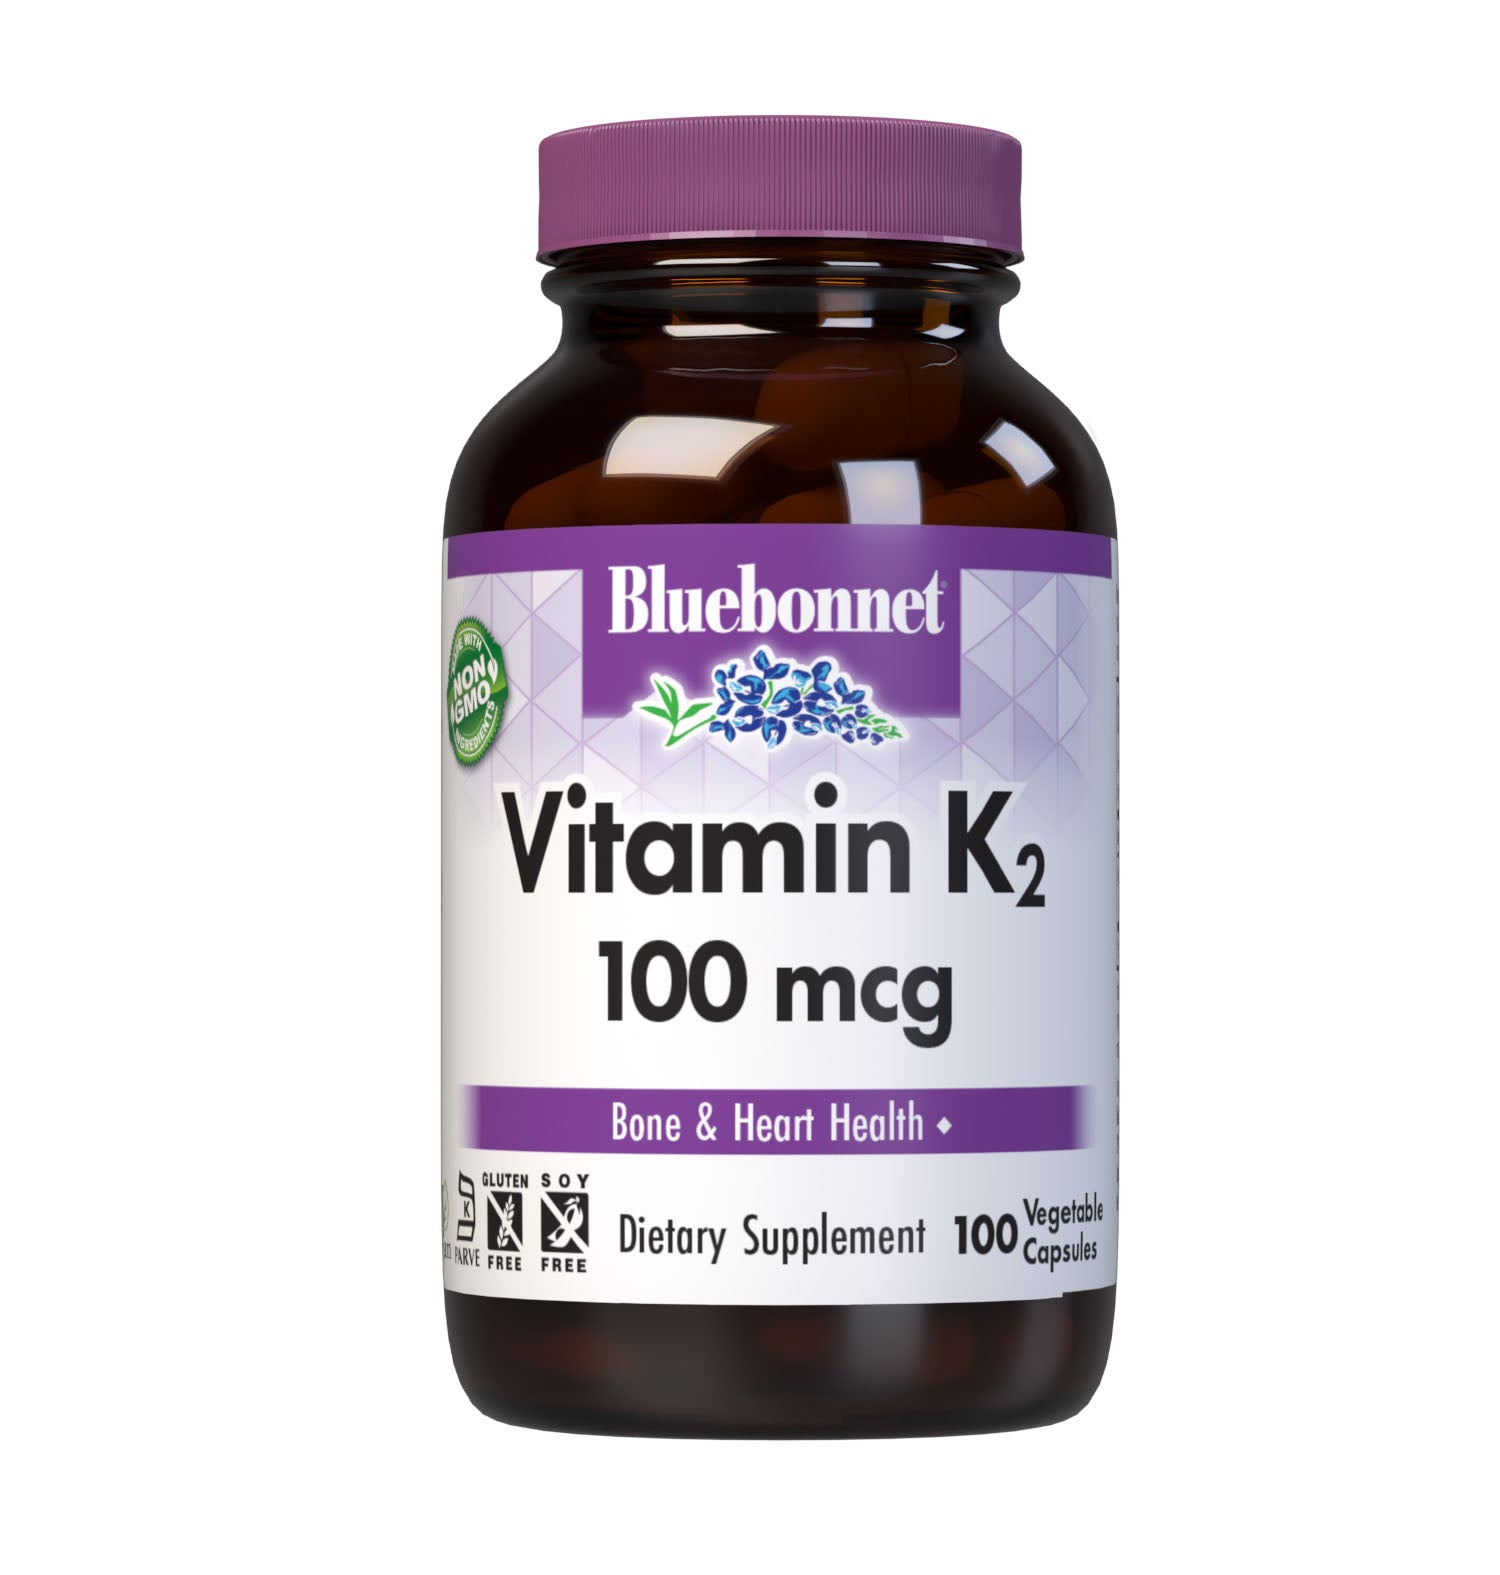 Bluebonnet’s Vitamin K2 100 mcg 100 Vegetable Capsules are formulated with Menaquinone-7 (MK-7) which is produced through a patented biofermentation process from Bacillus subtilis natto cultures. Menaquinone-7 is an enhanced bioactive form of vitamin K2 to help support bone and cardiovascular health. #size_100 count